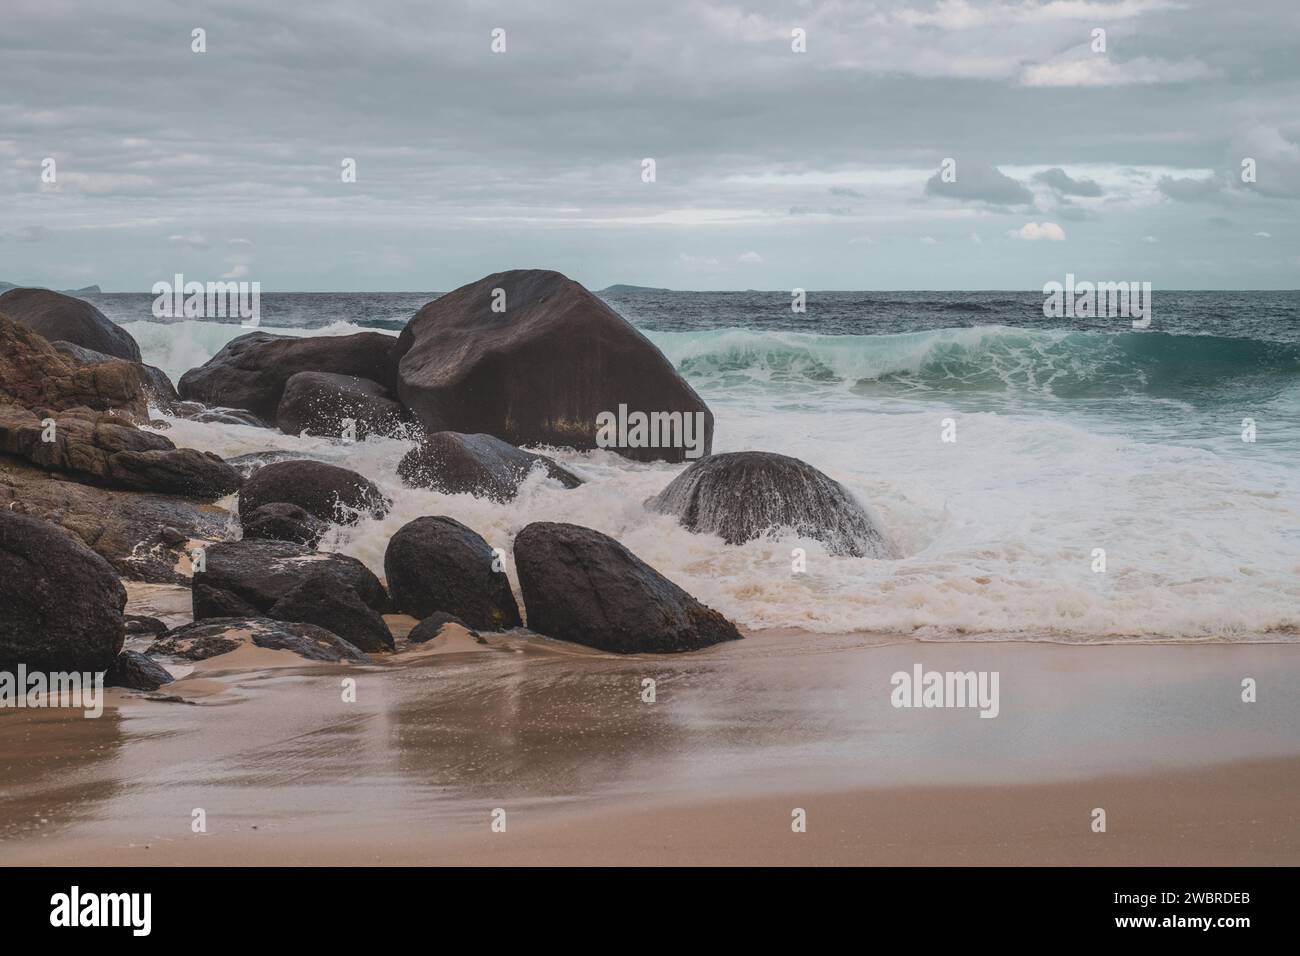 waves crash onto boulders in remote stormy beach in australia Stock Photo